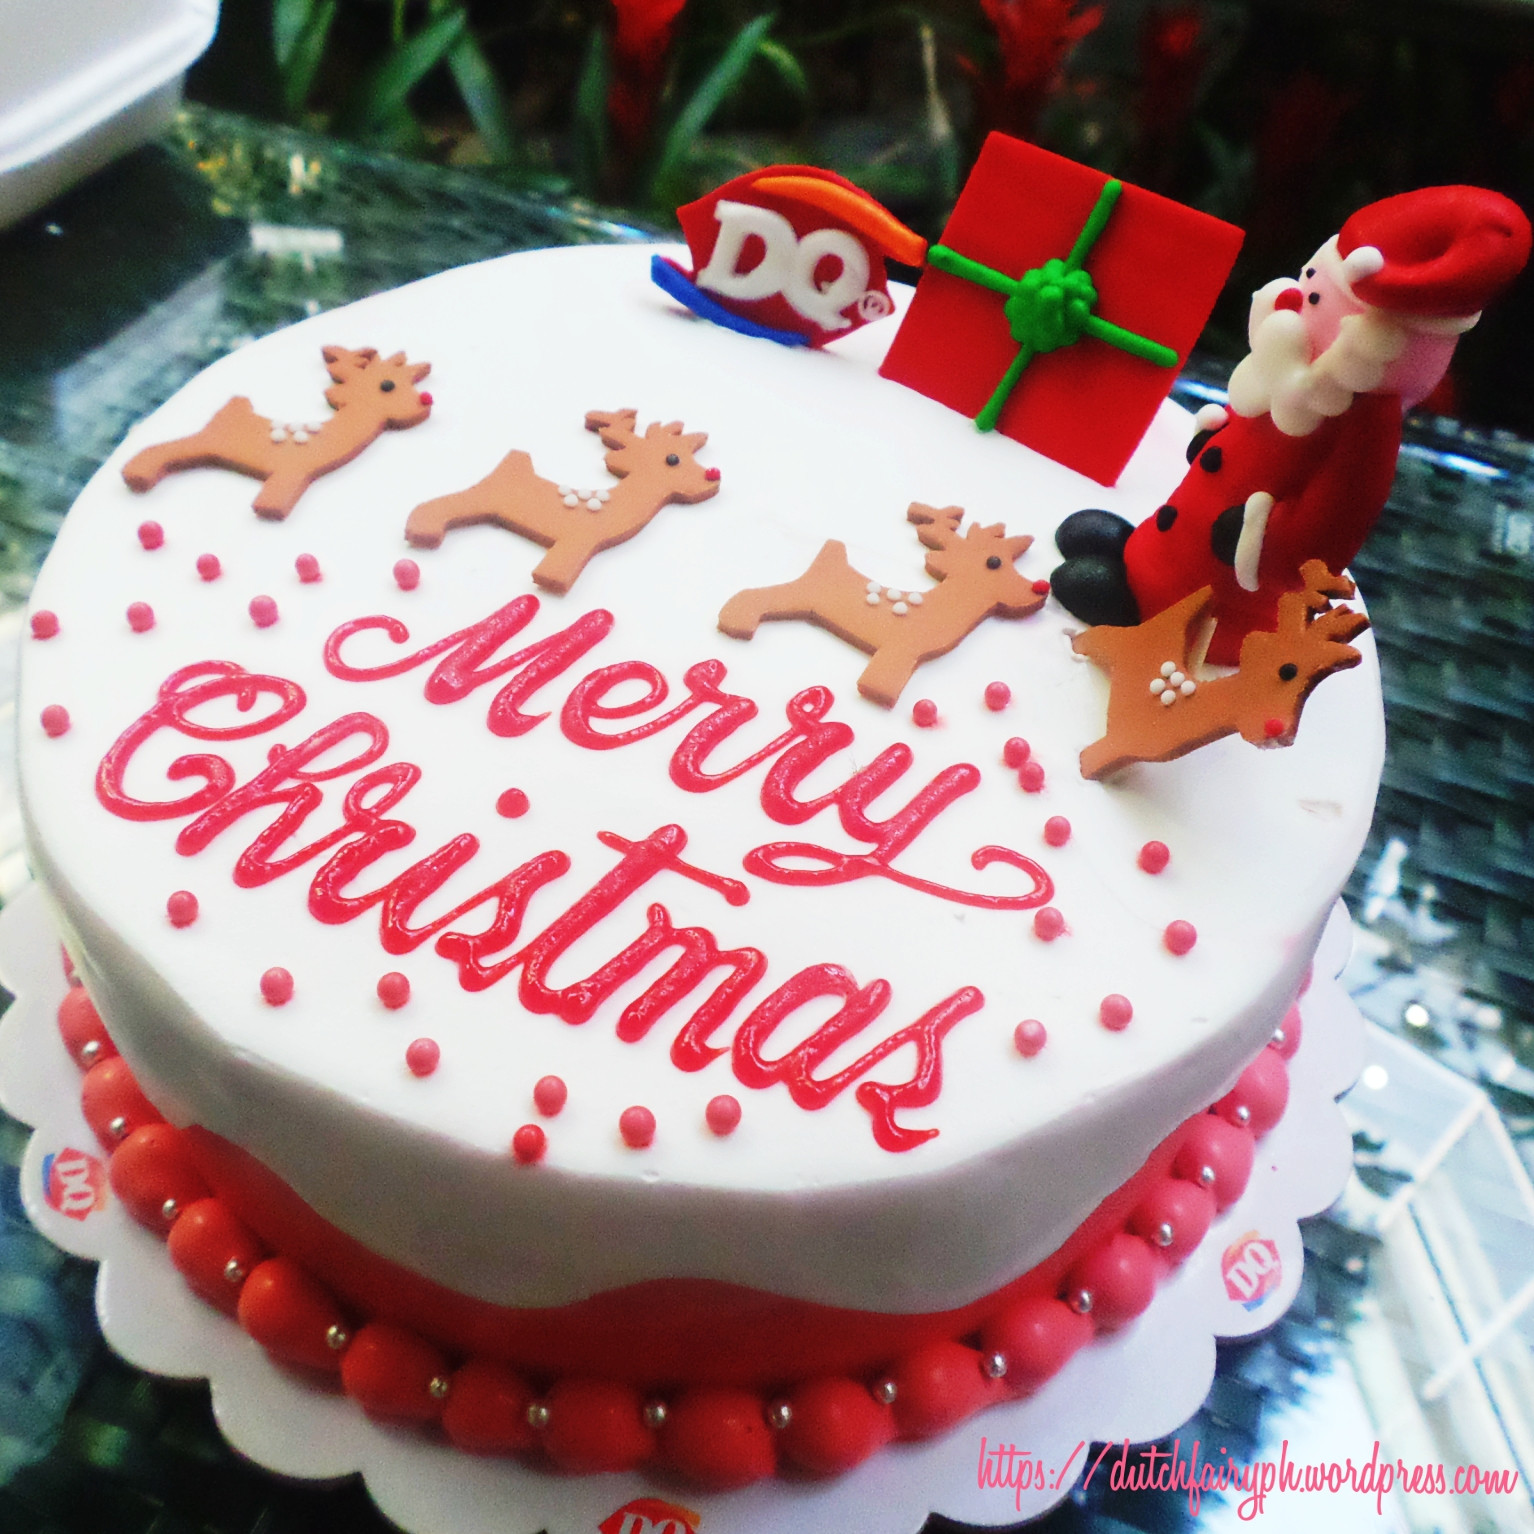 Dairy Queen Christmas Cakes
 Event Sweet and Colorful Holiday Treats from Dairy Queen